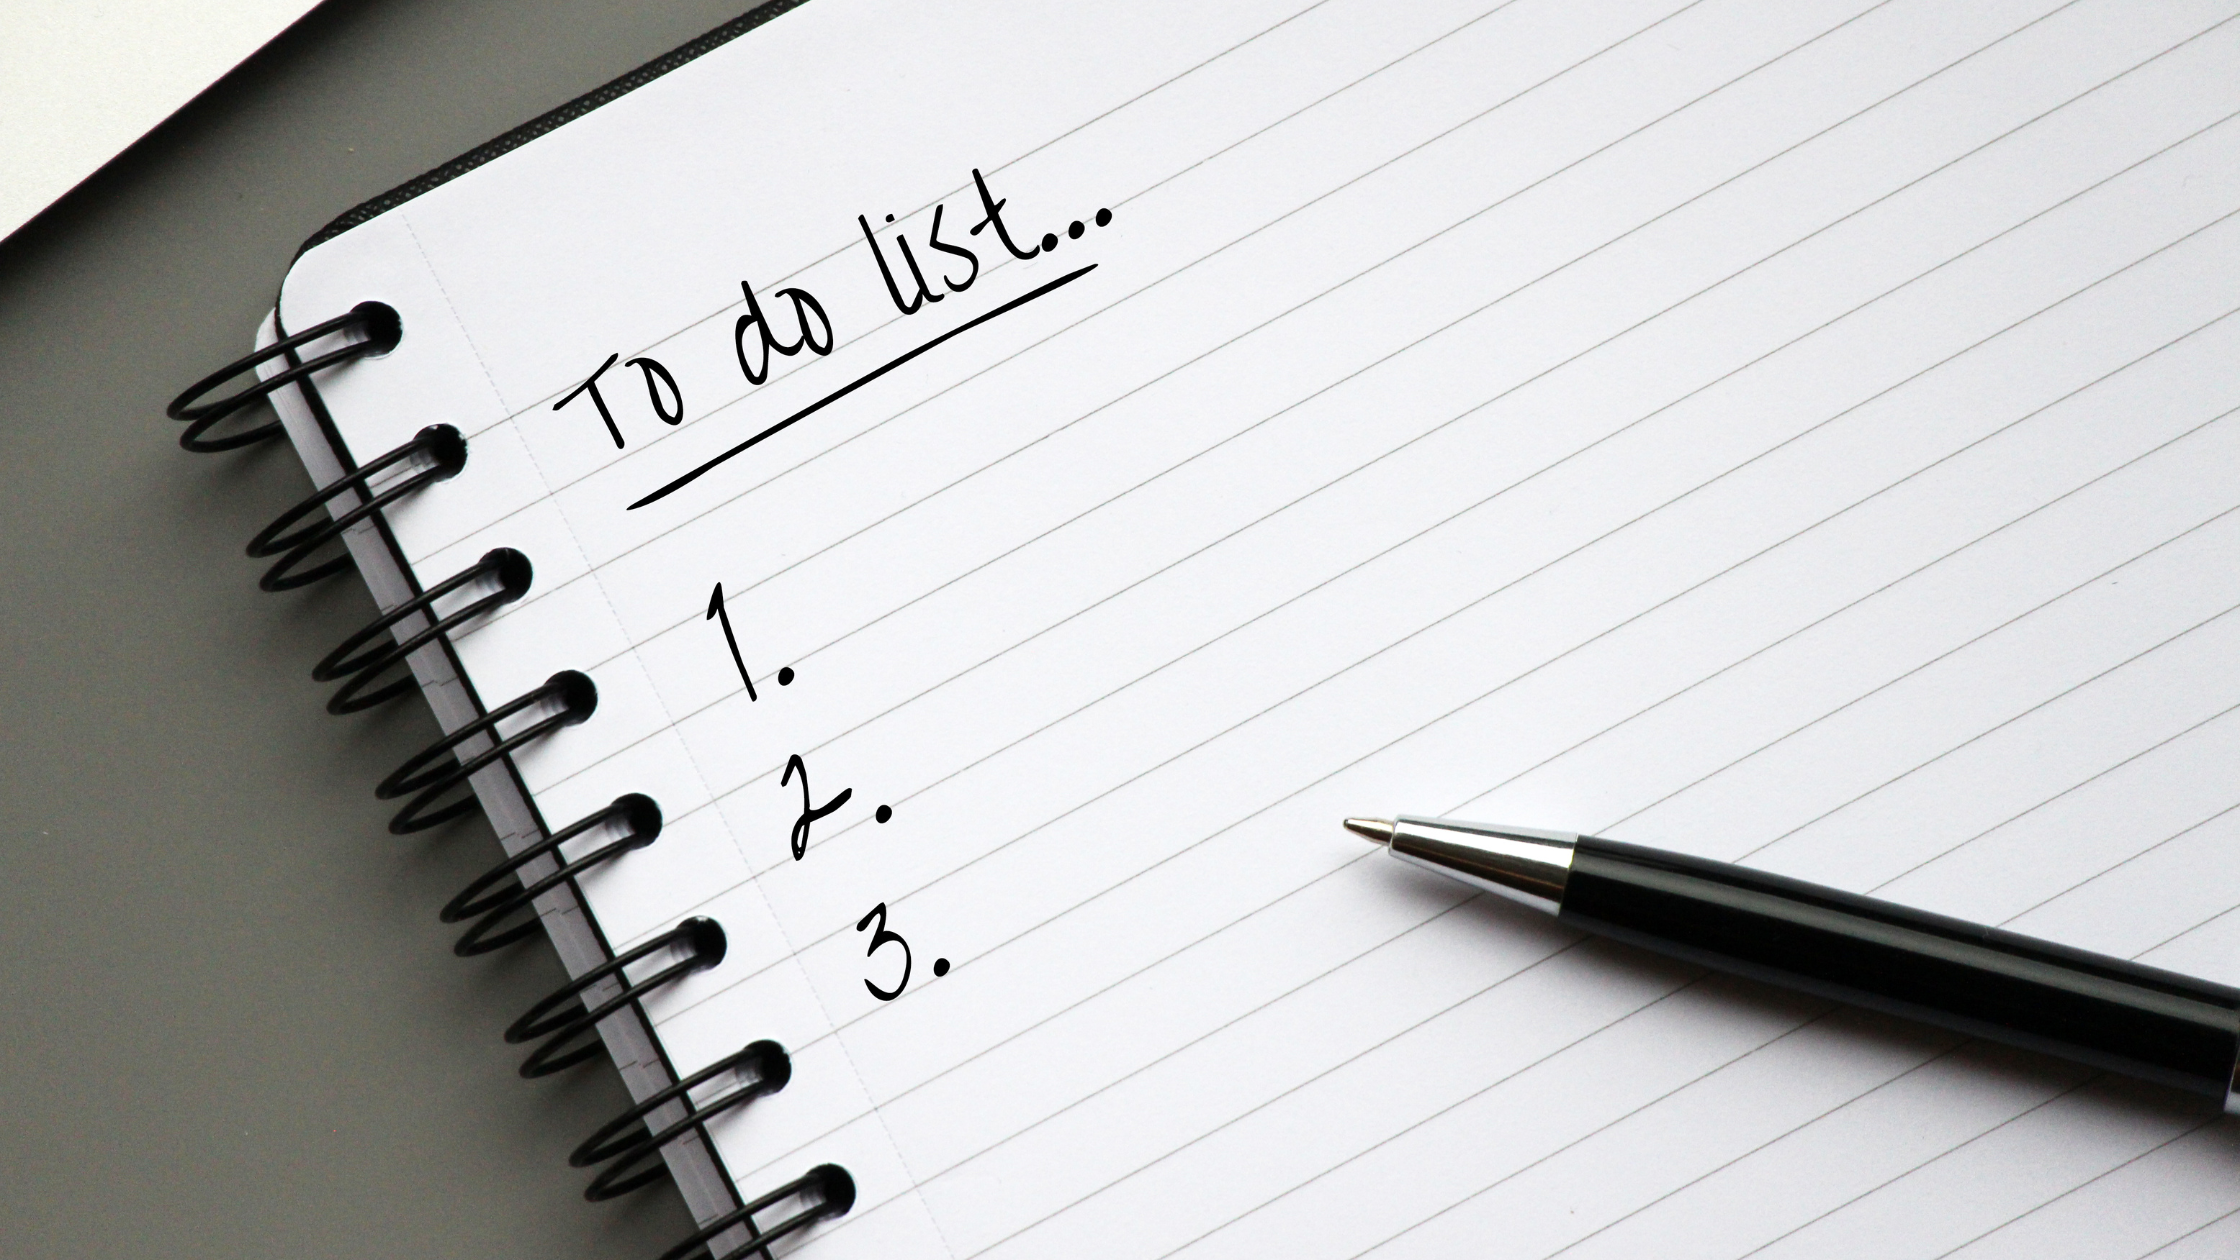 A notepad containing a to-do list for a paralegal depicts the busy nature of a typical litigation paralegal's day.